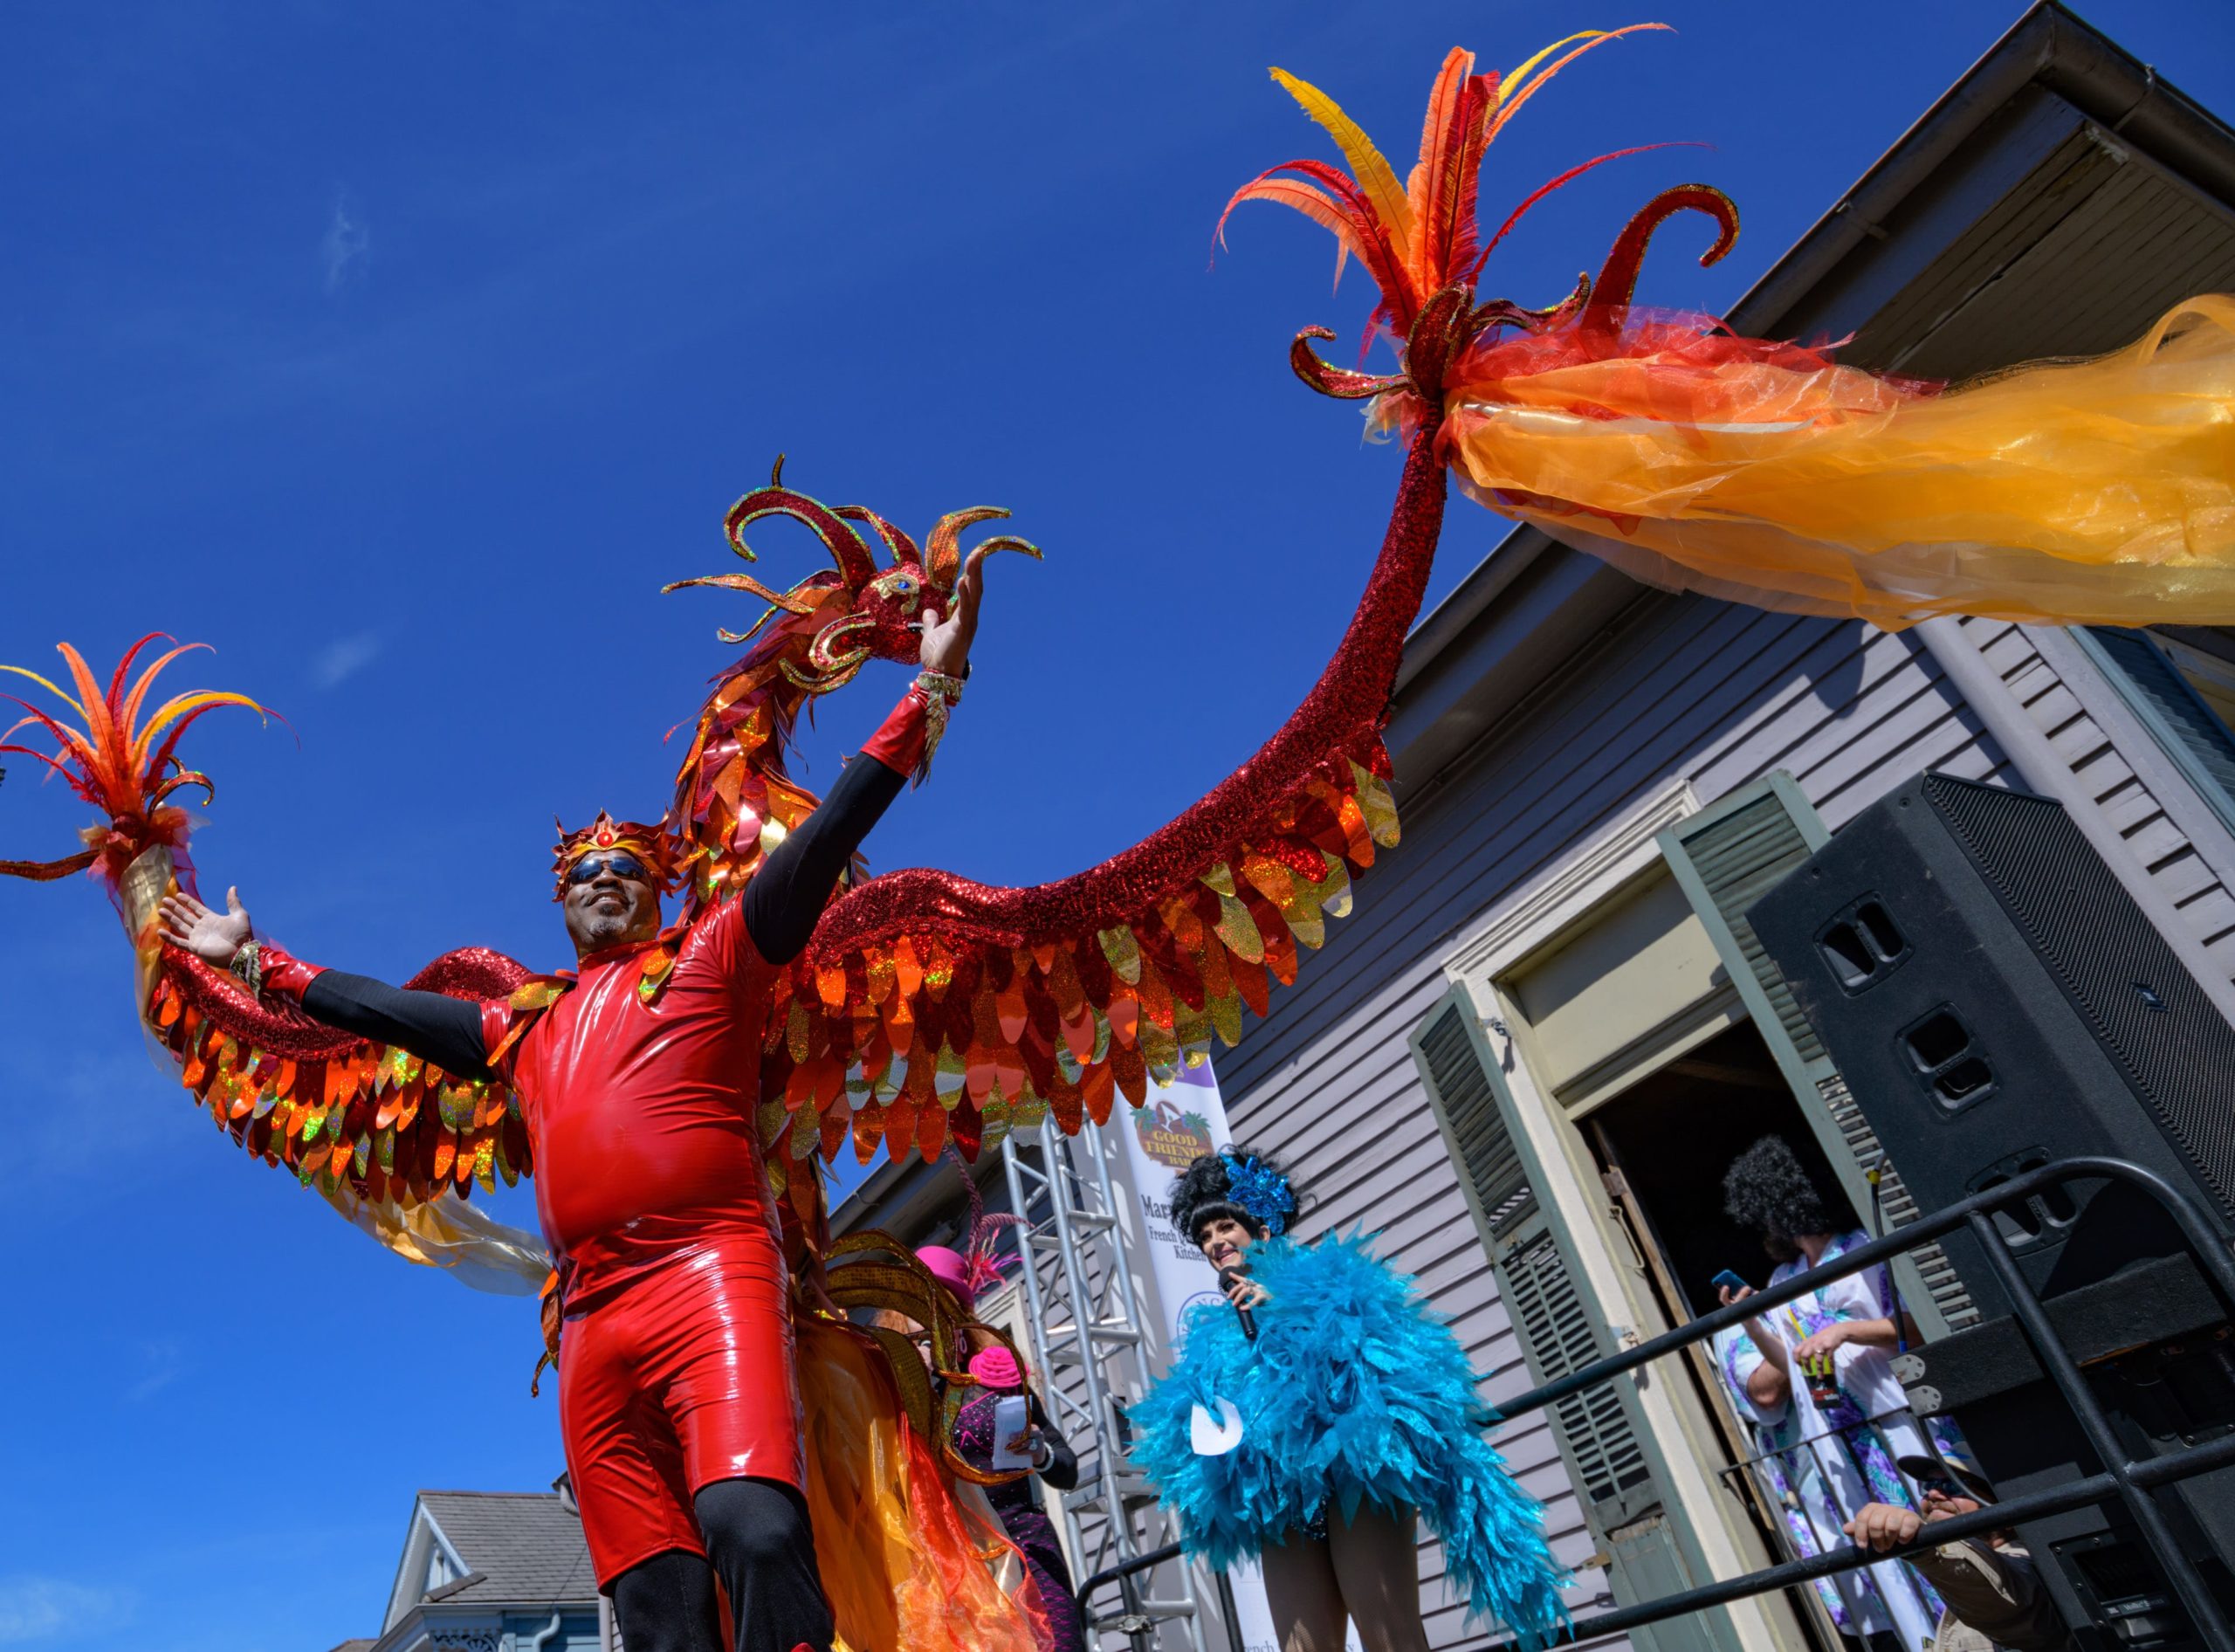 Contestants take part in the Bourbon Street Awards in New Orleans, La., March 5, 2019. Participants compete in the following categories: Best Drag, Best Leather, Best Group and Best of Show. Photo by Matthew Hinton